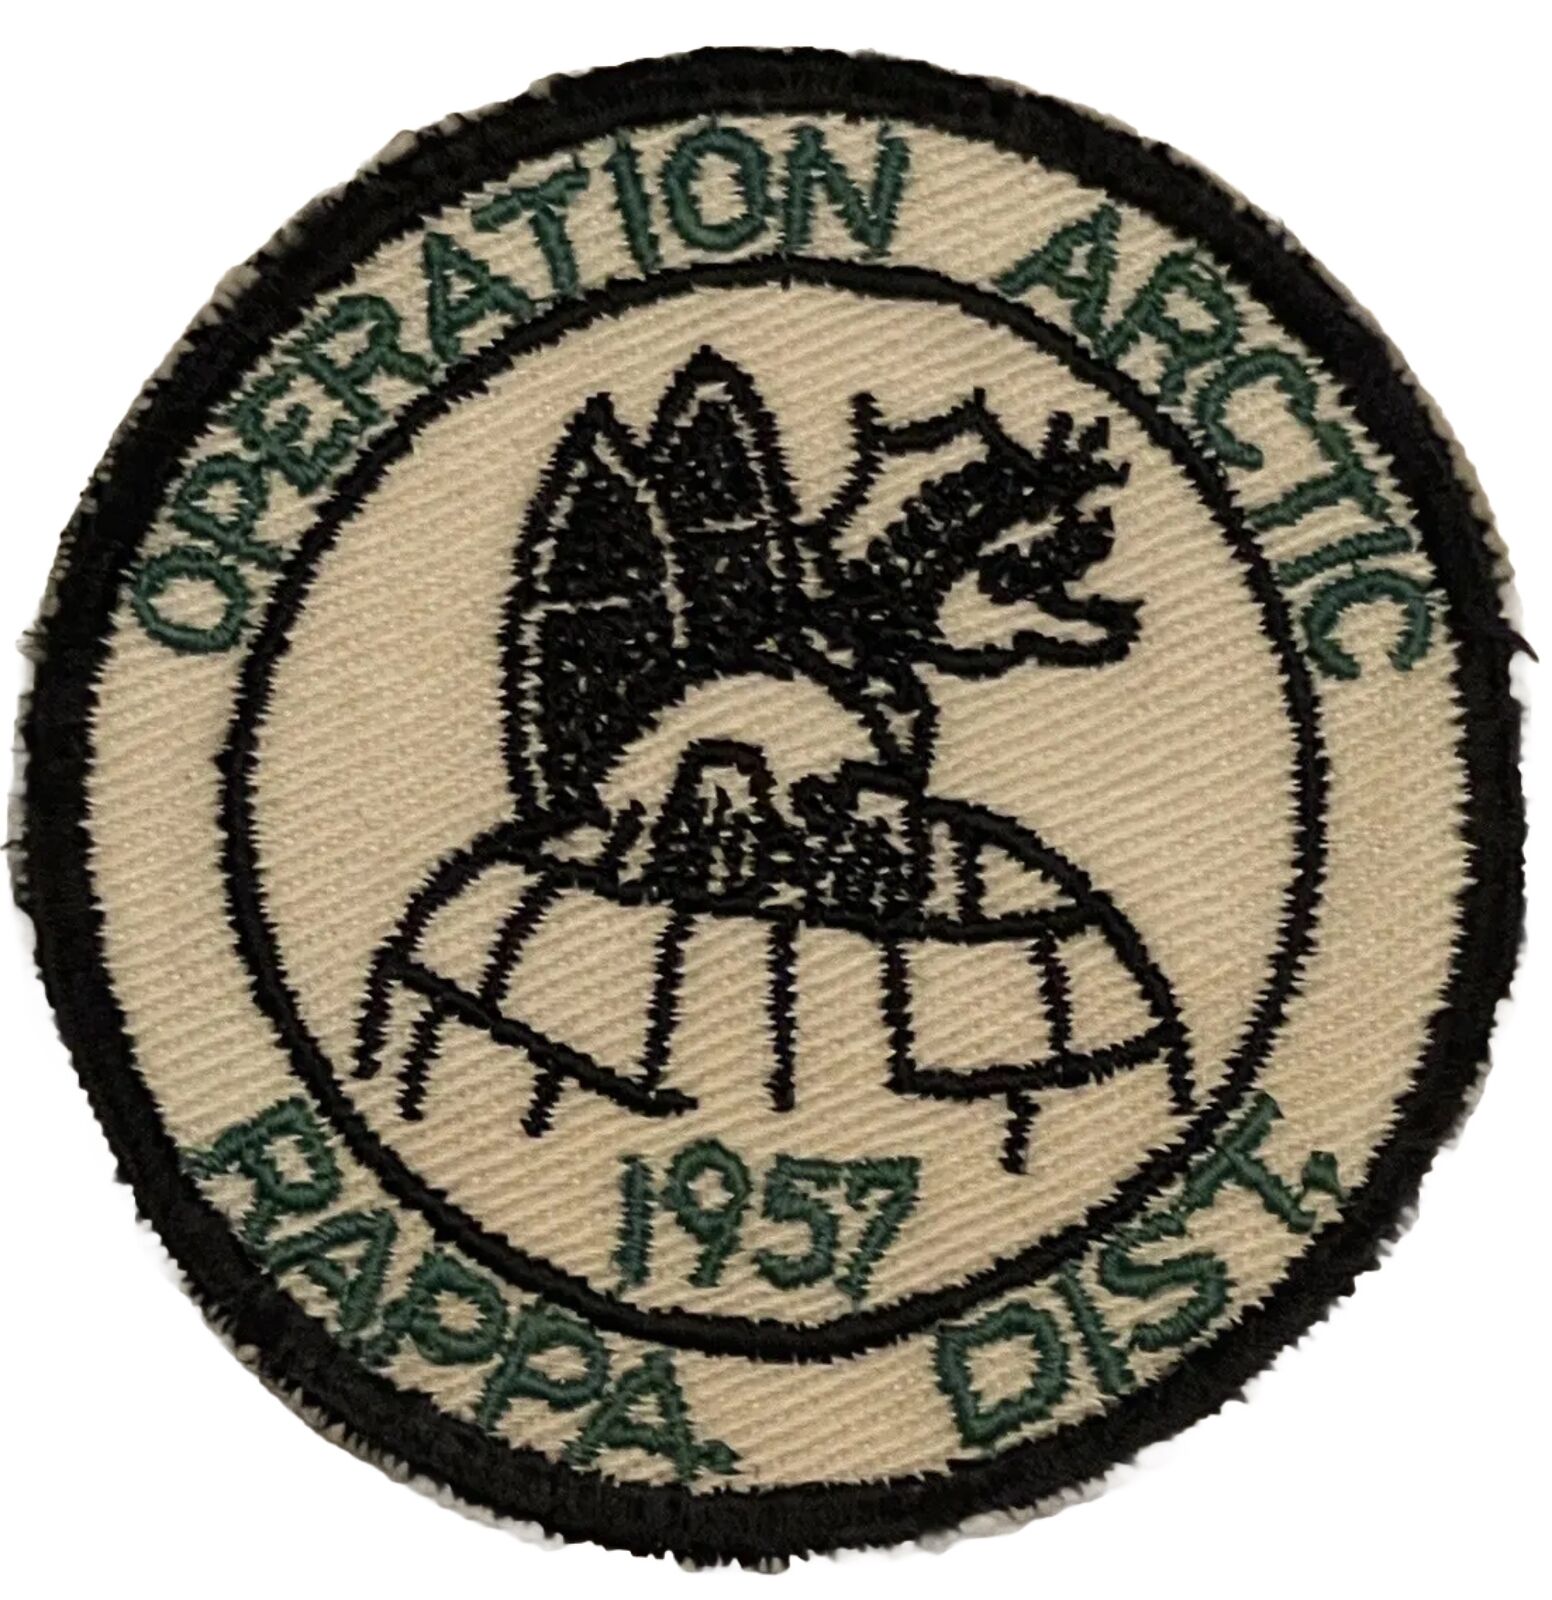 Rappa District Patch 1957 Operation Arctic BSA Boy Scouts Vintage Embroidered